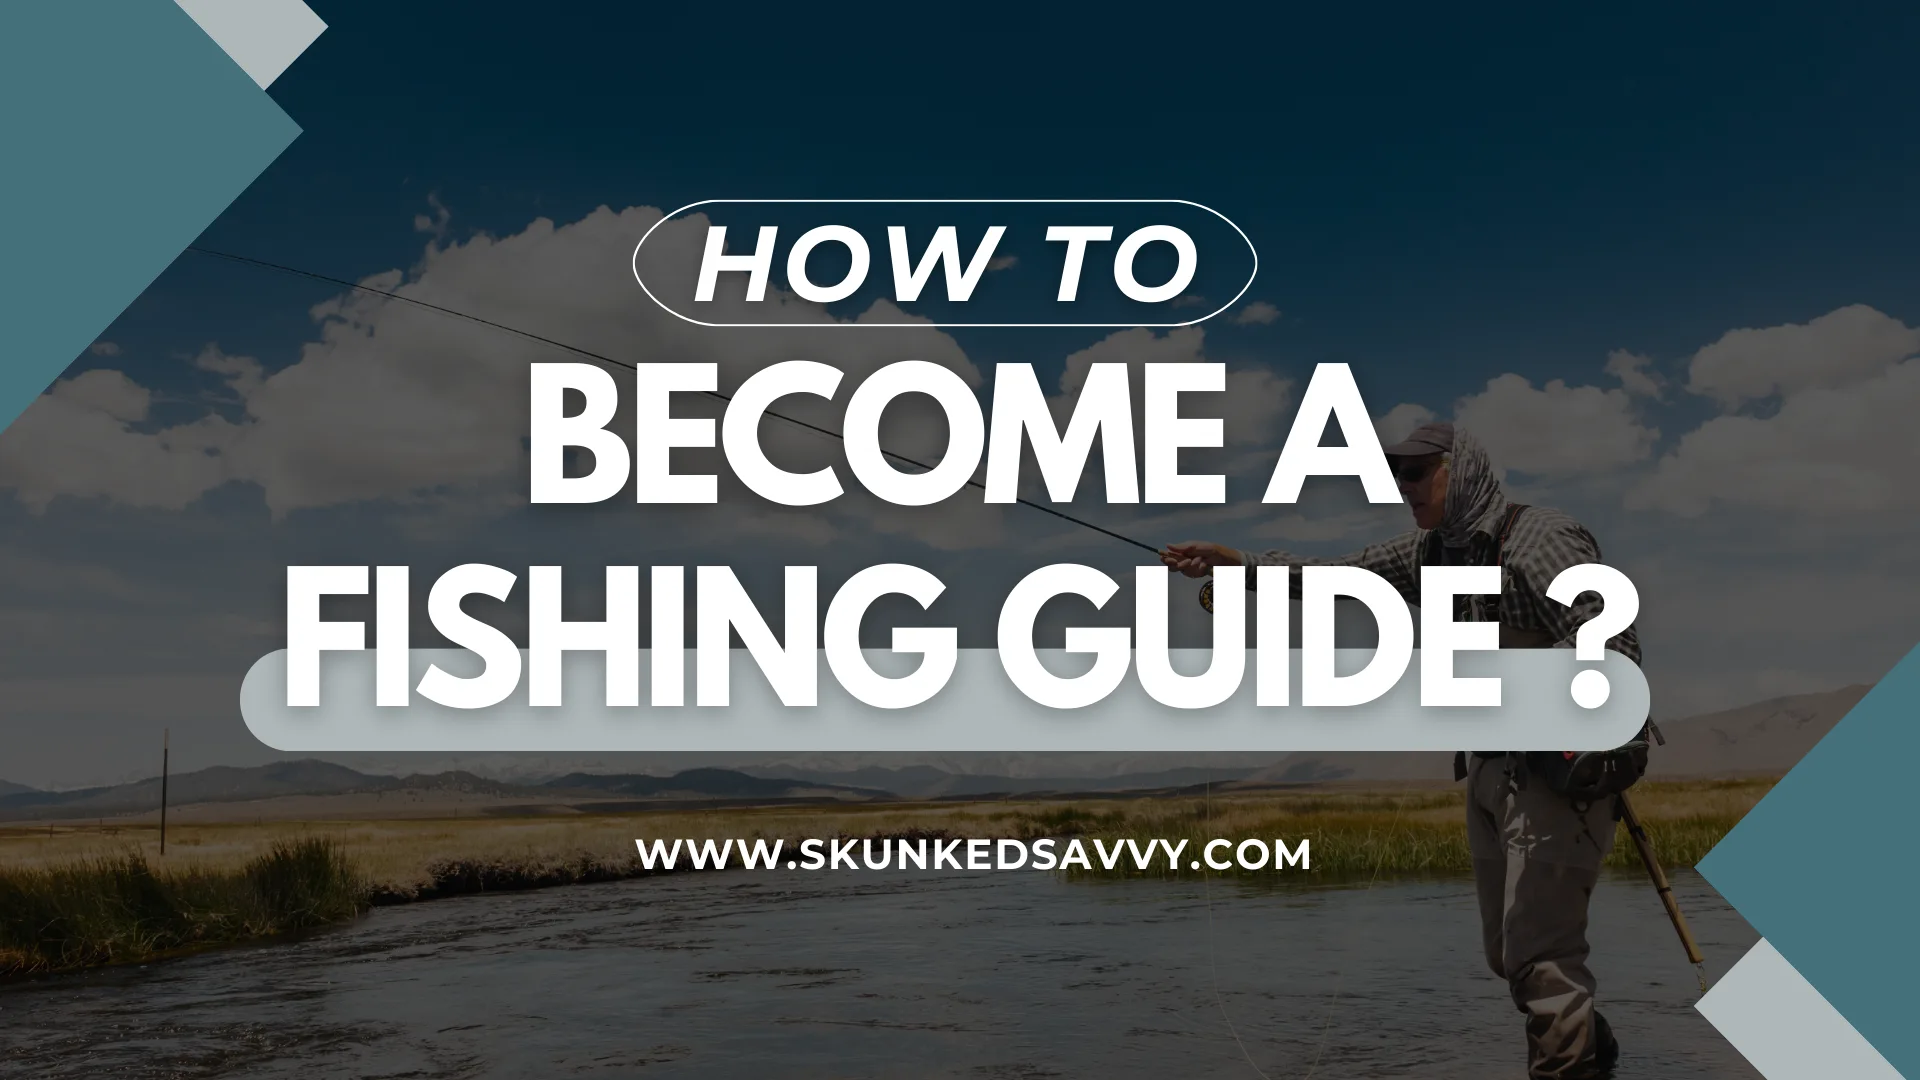 How to Become a Fishing Guide